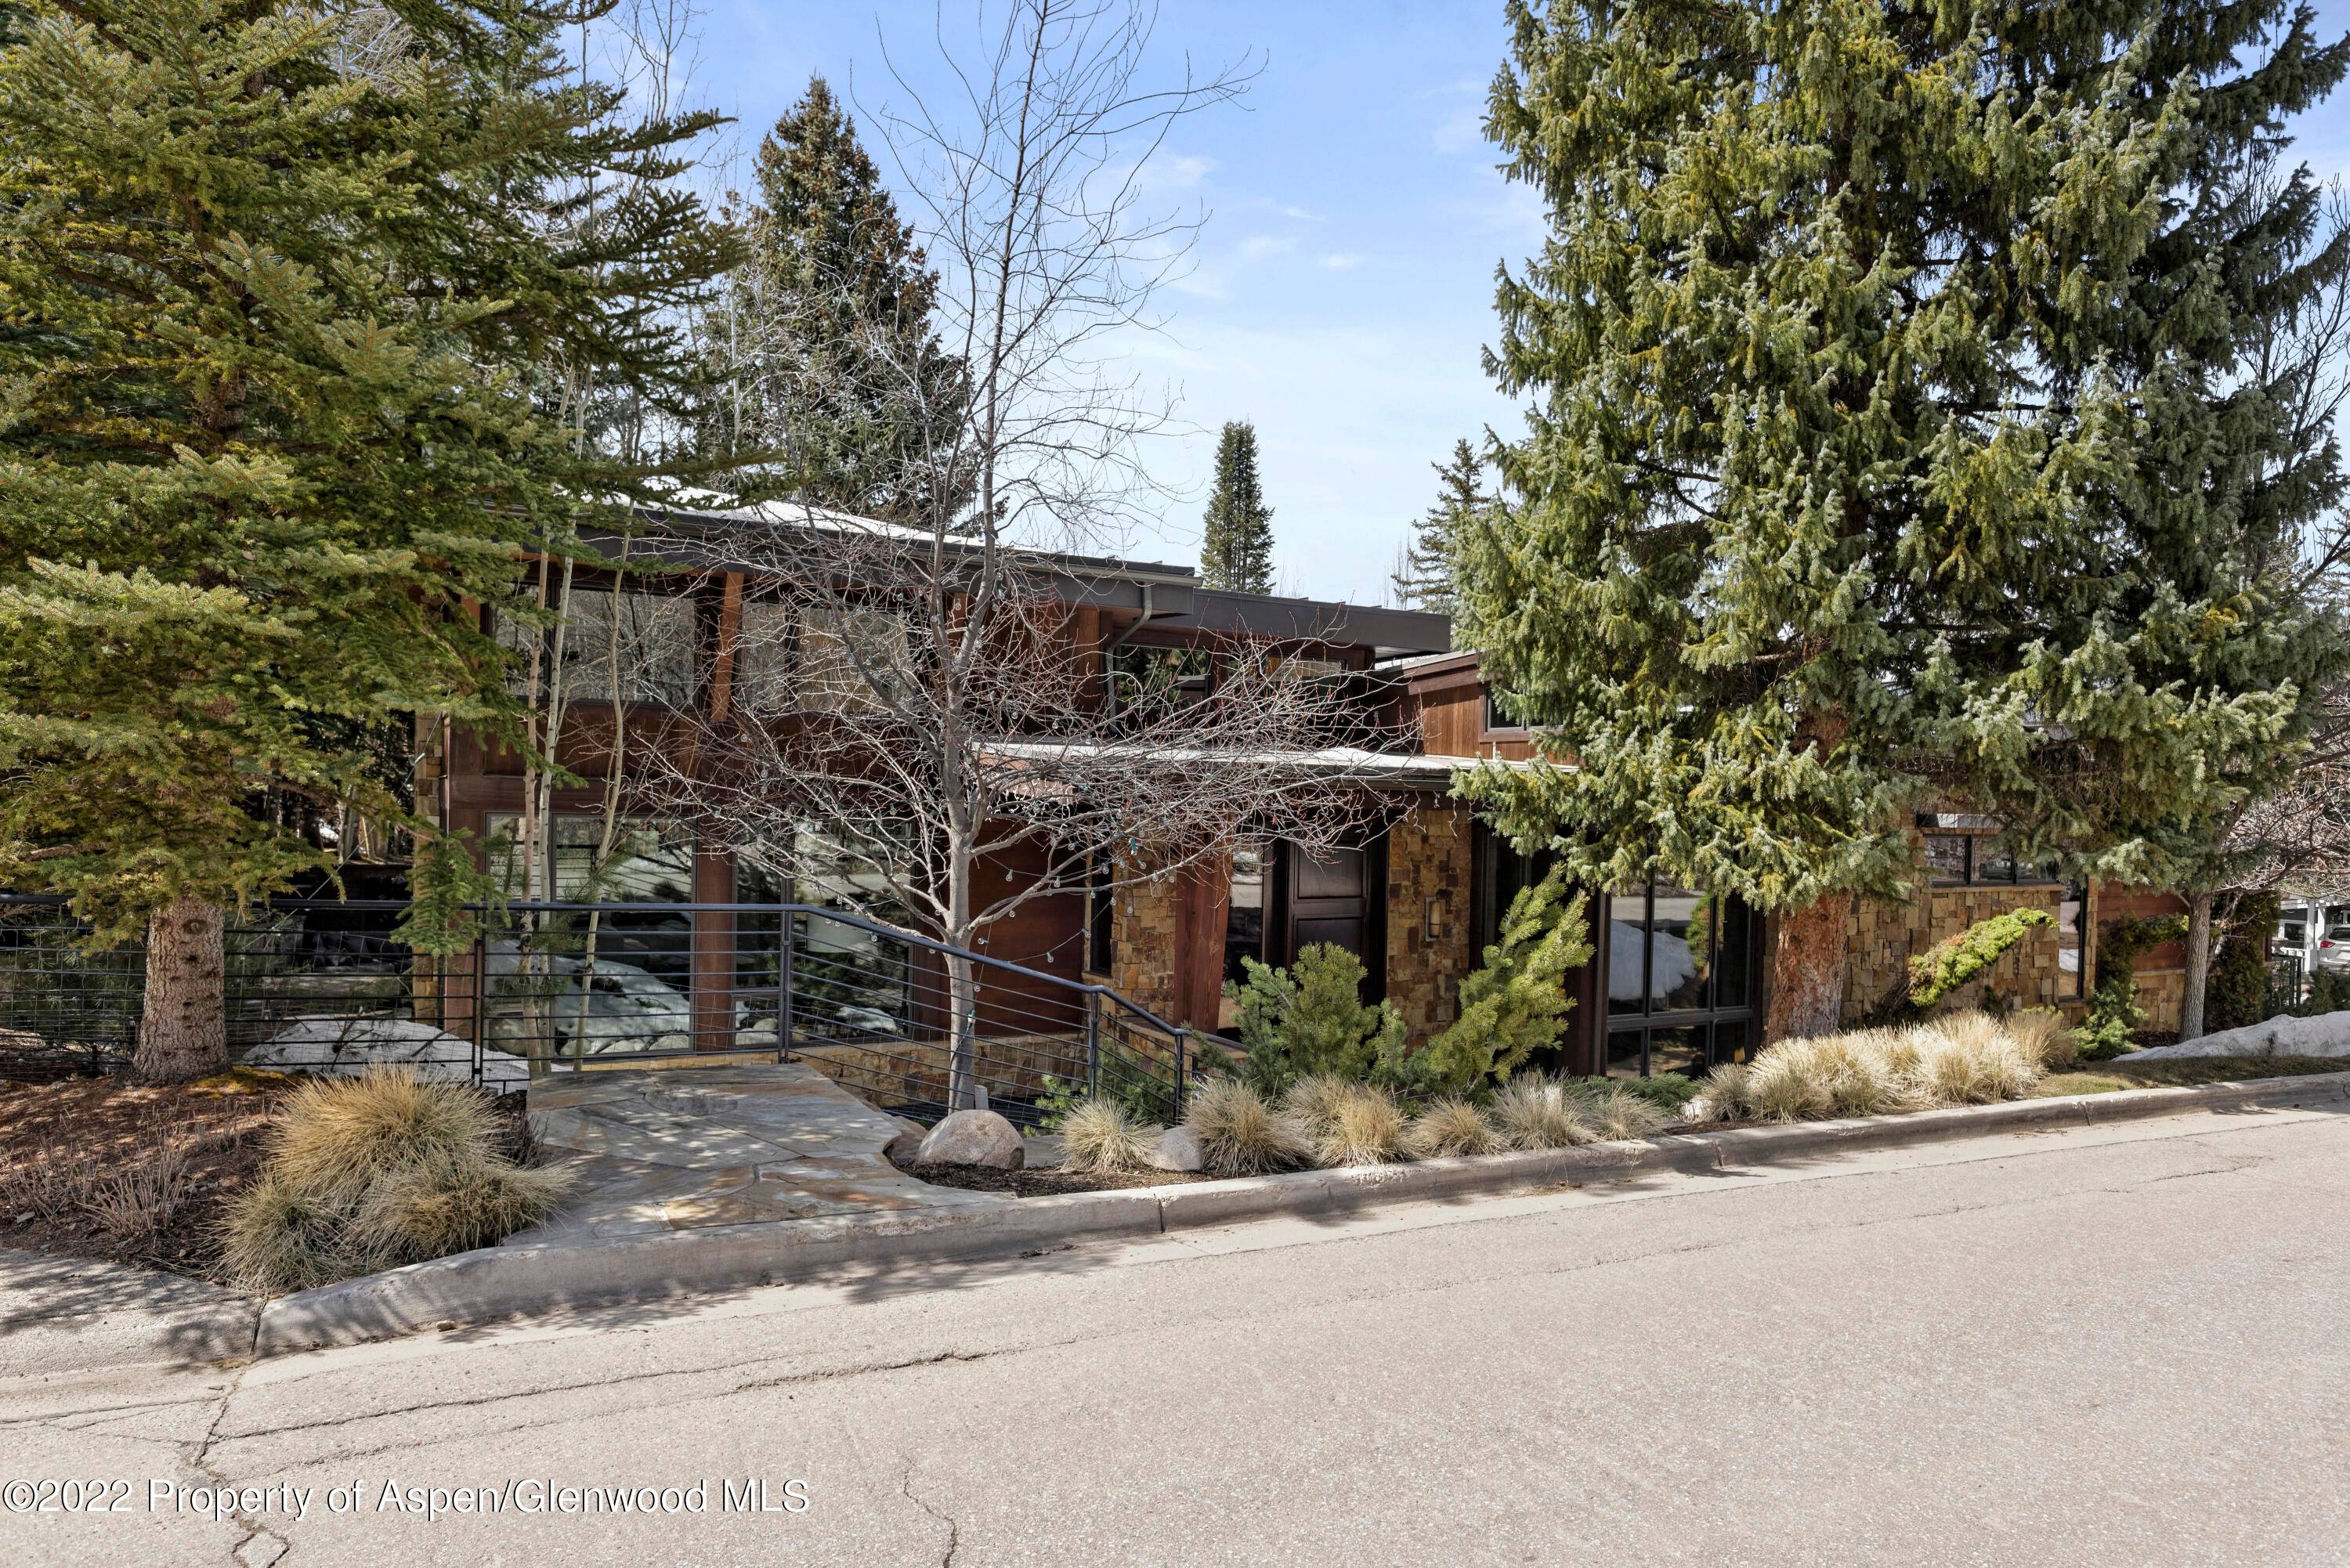 Single family homes are a rare commodity in proximity to downtown Aspen.